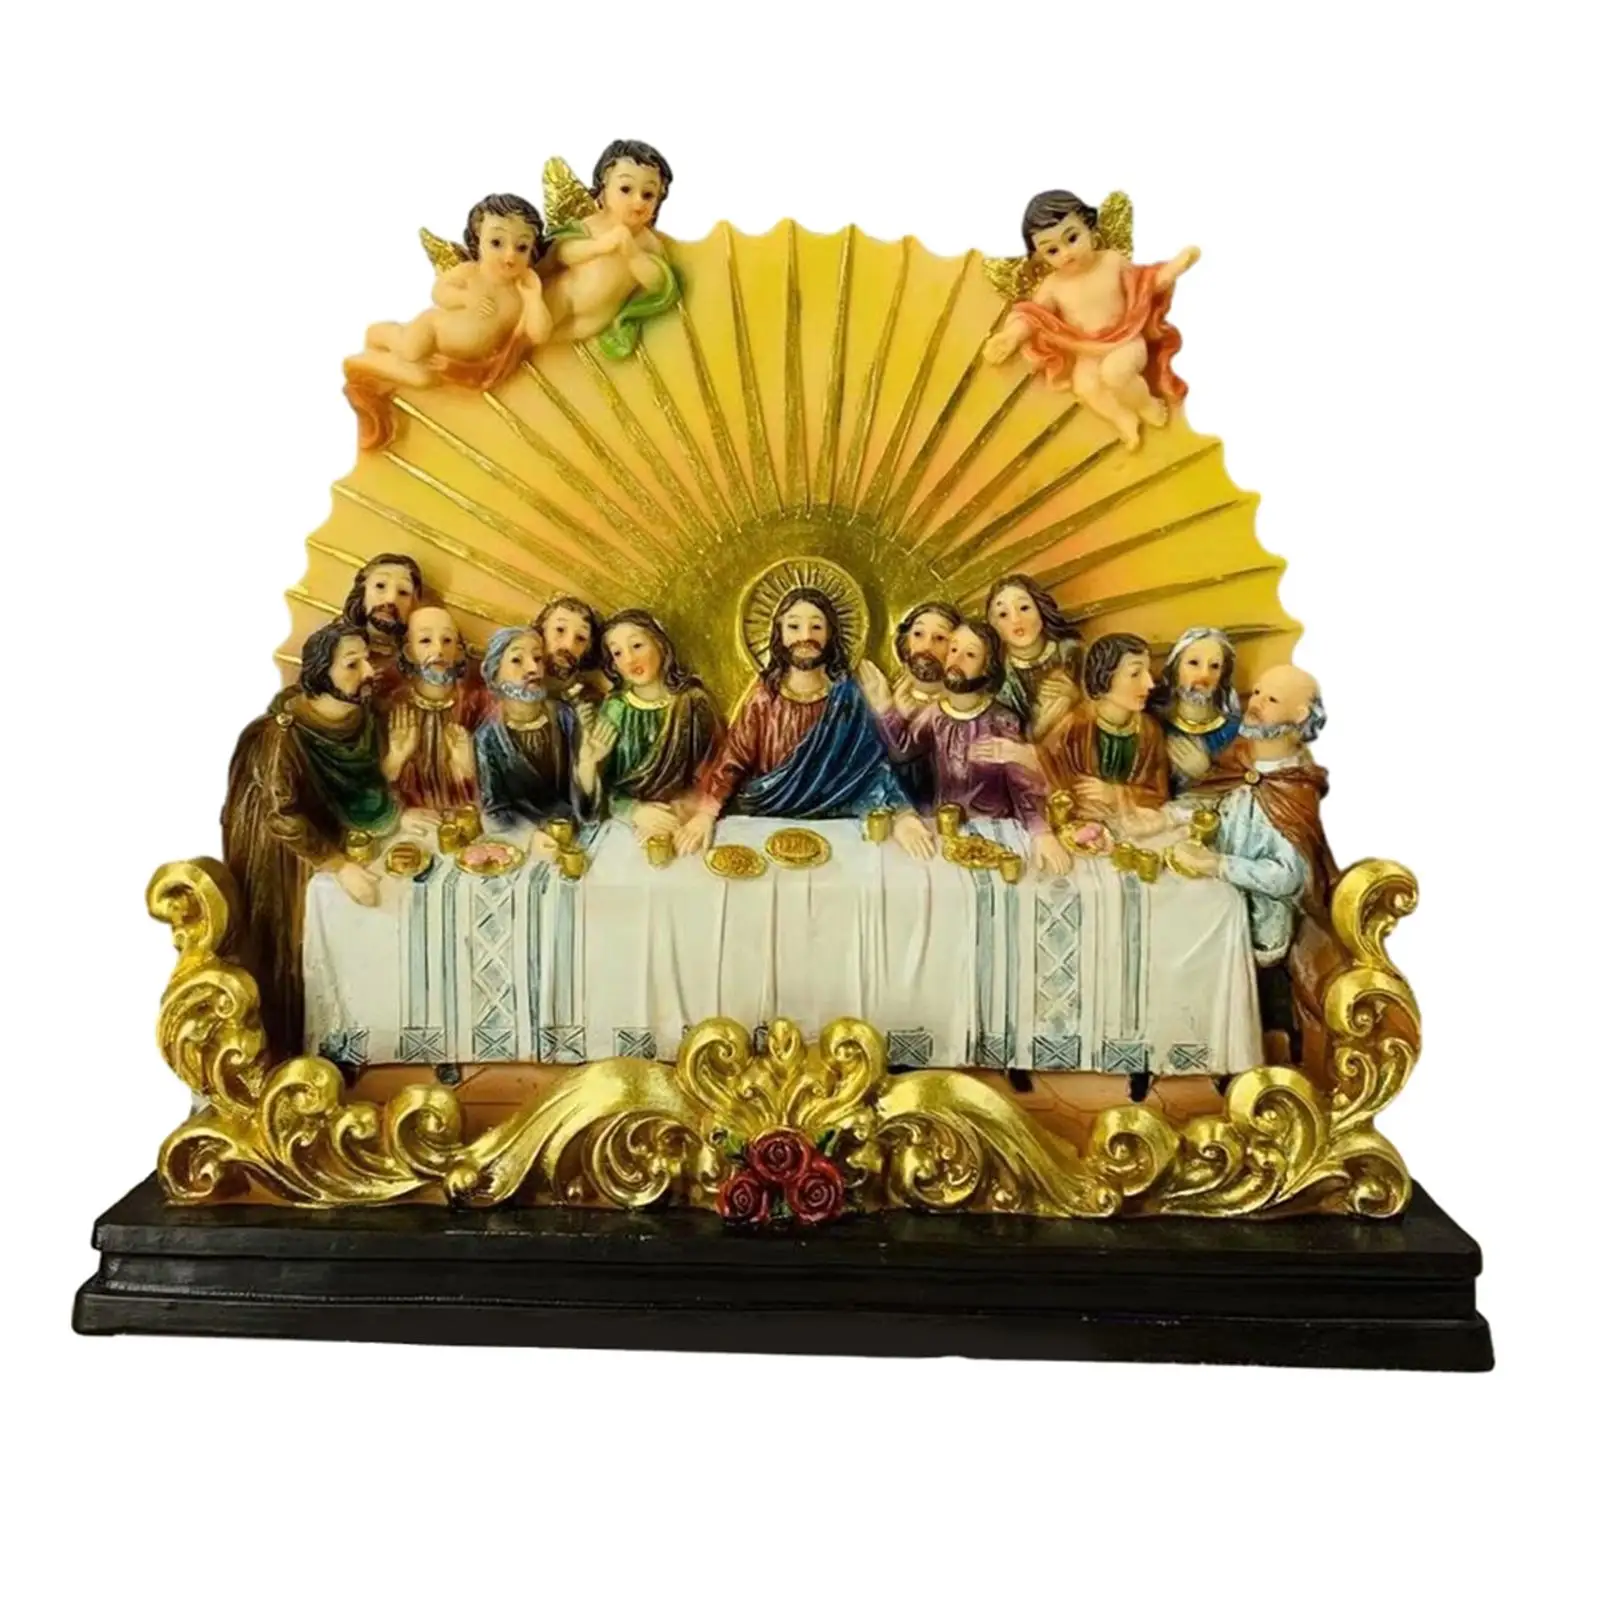 Resin Last Supper Statue Sculpture Christian Catholic Figurine Jesus and 12 Disciples for Office Collection Gifts Decor